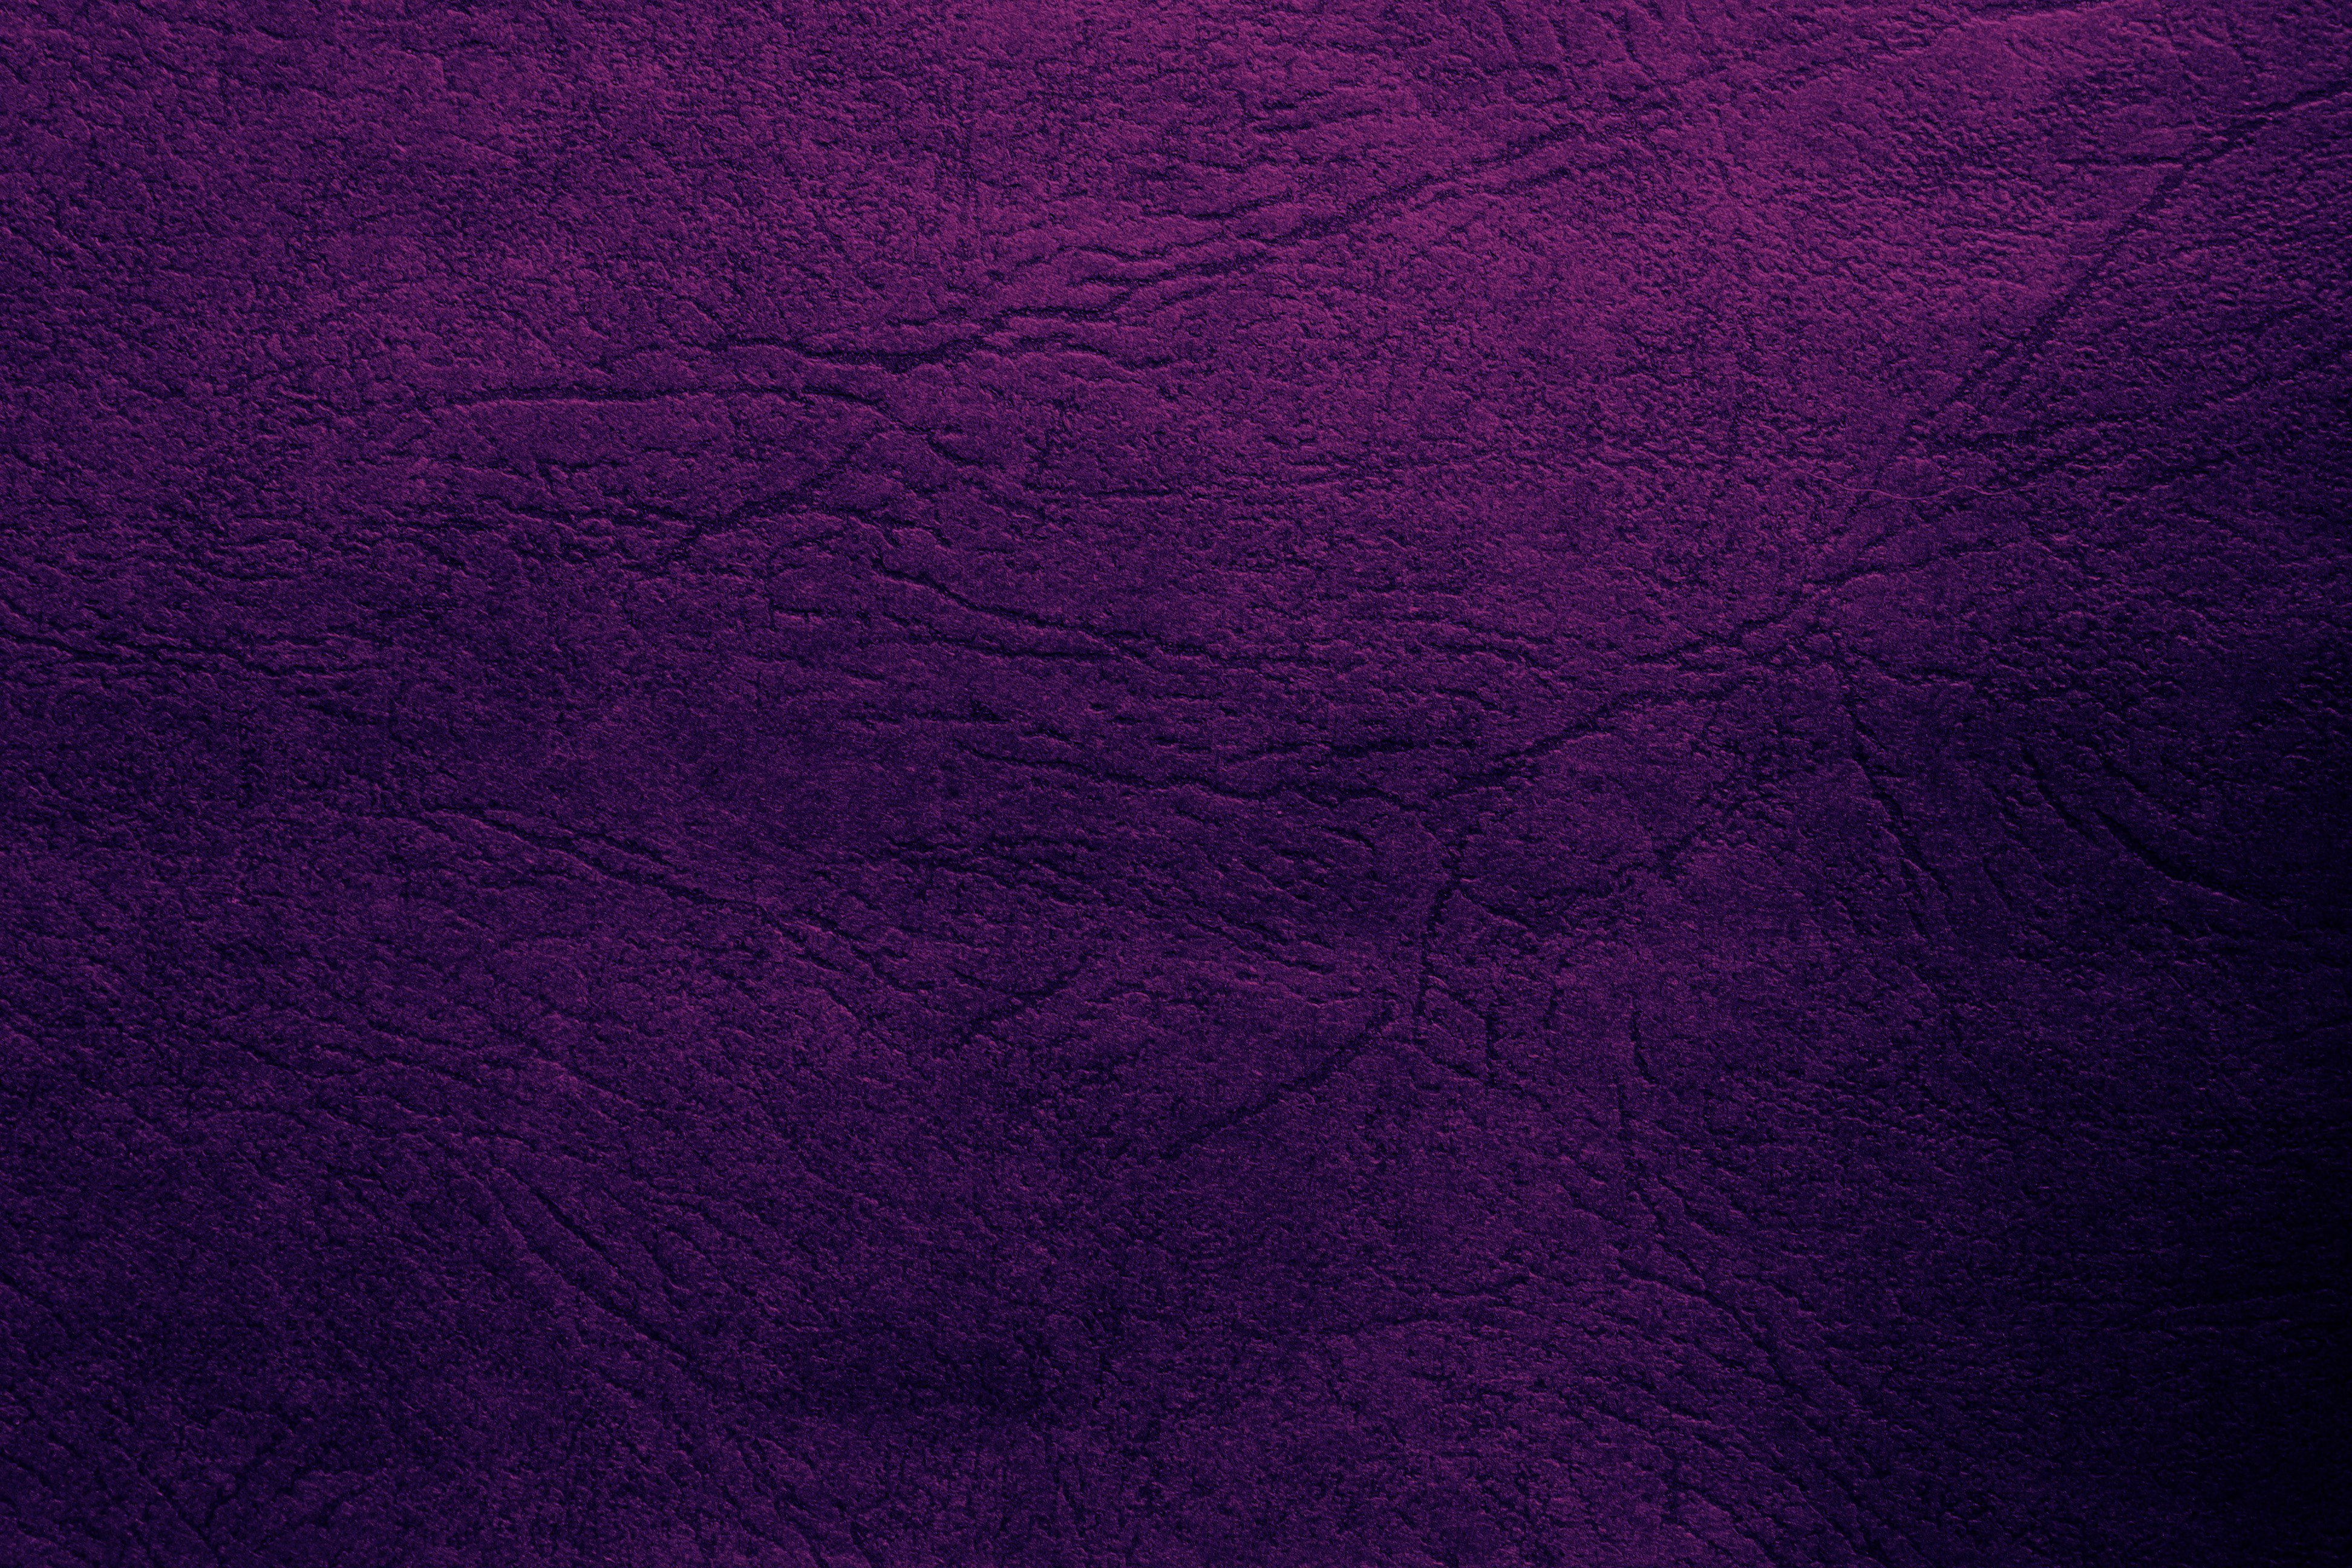 Purple Leather Texture High Resolution Photo Dimensions